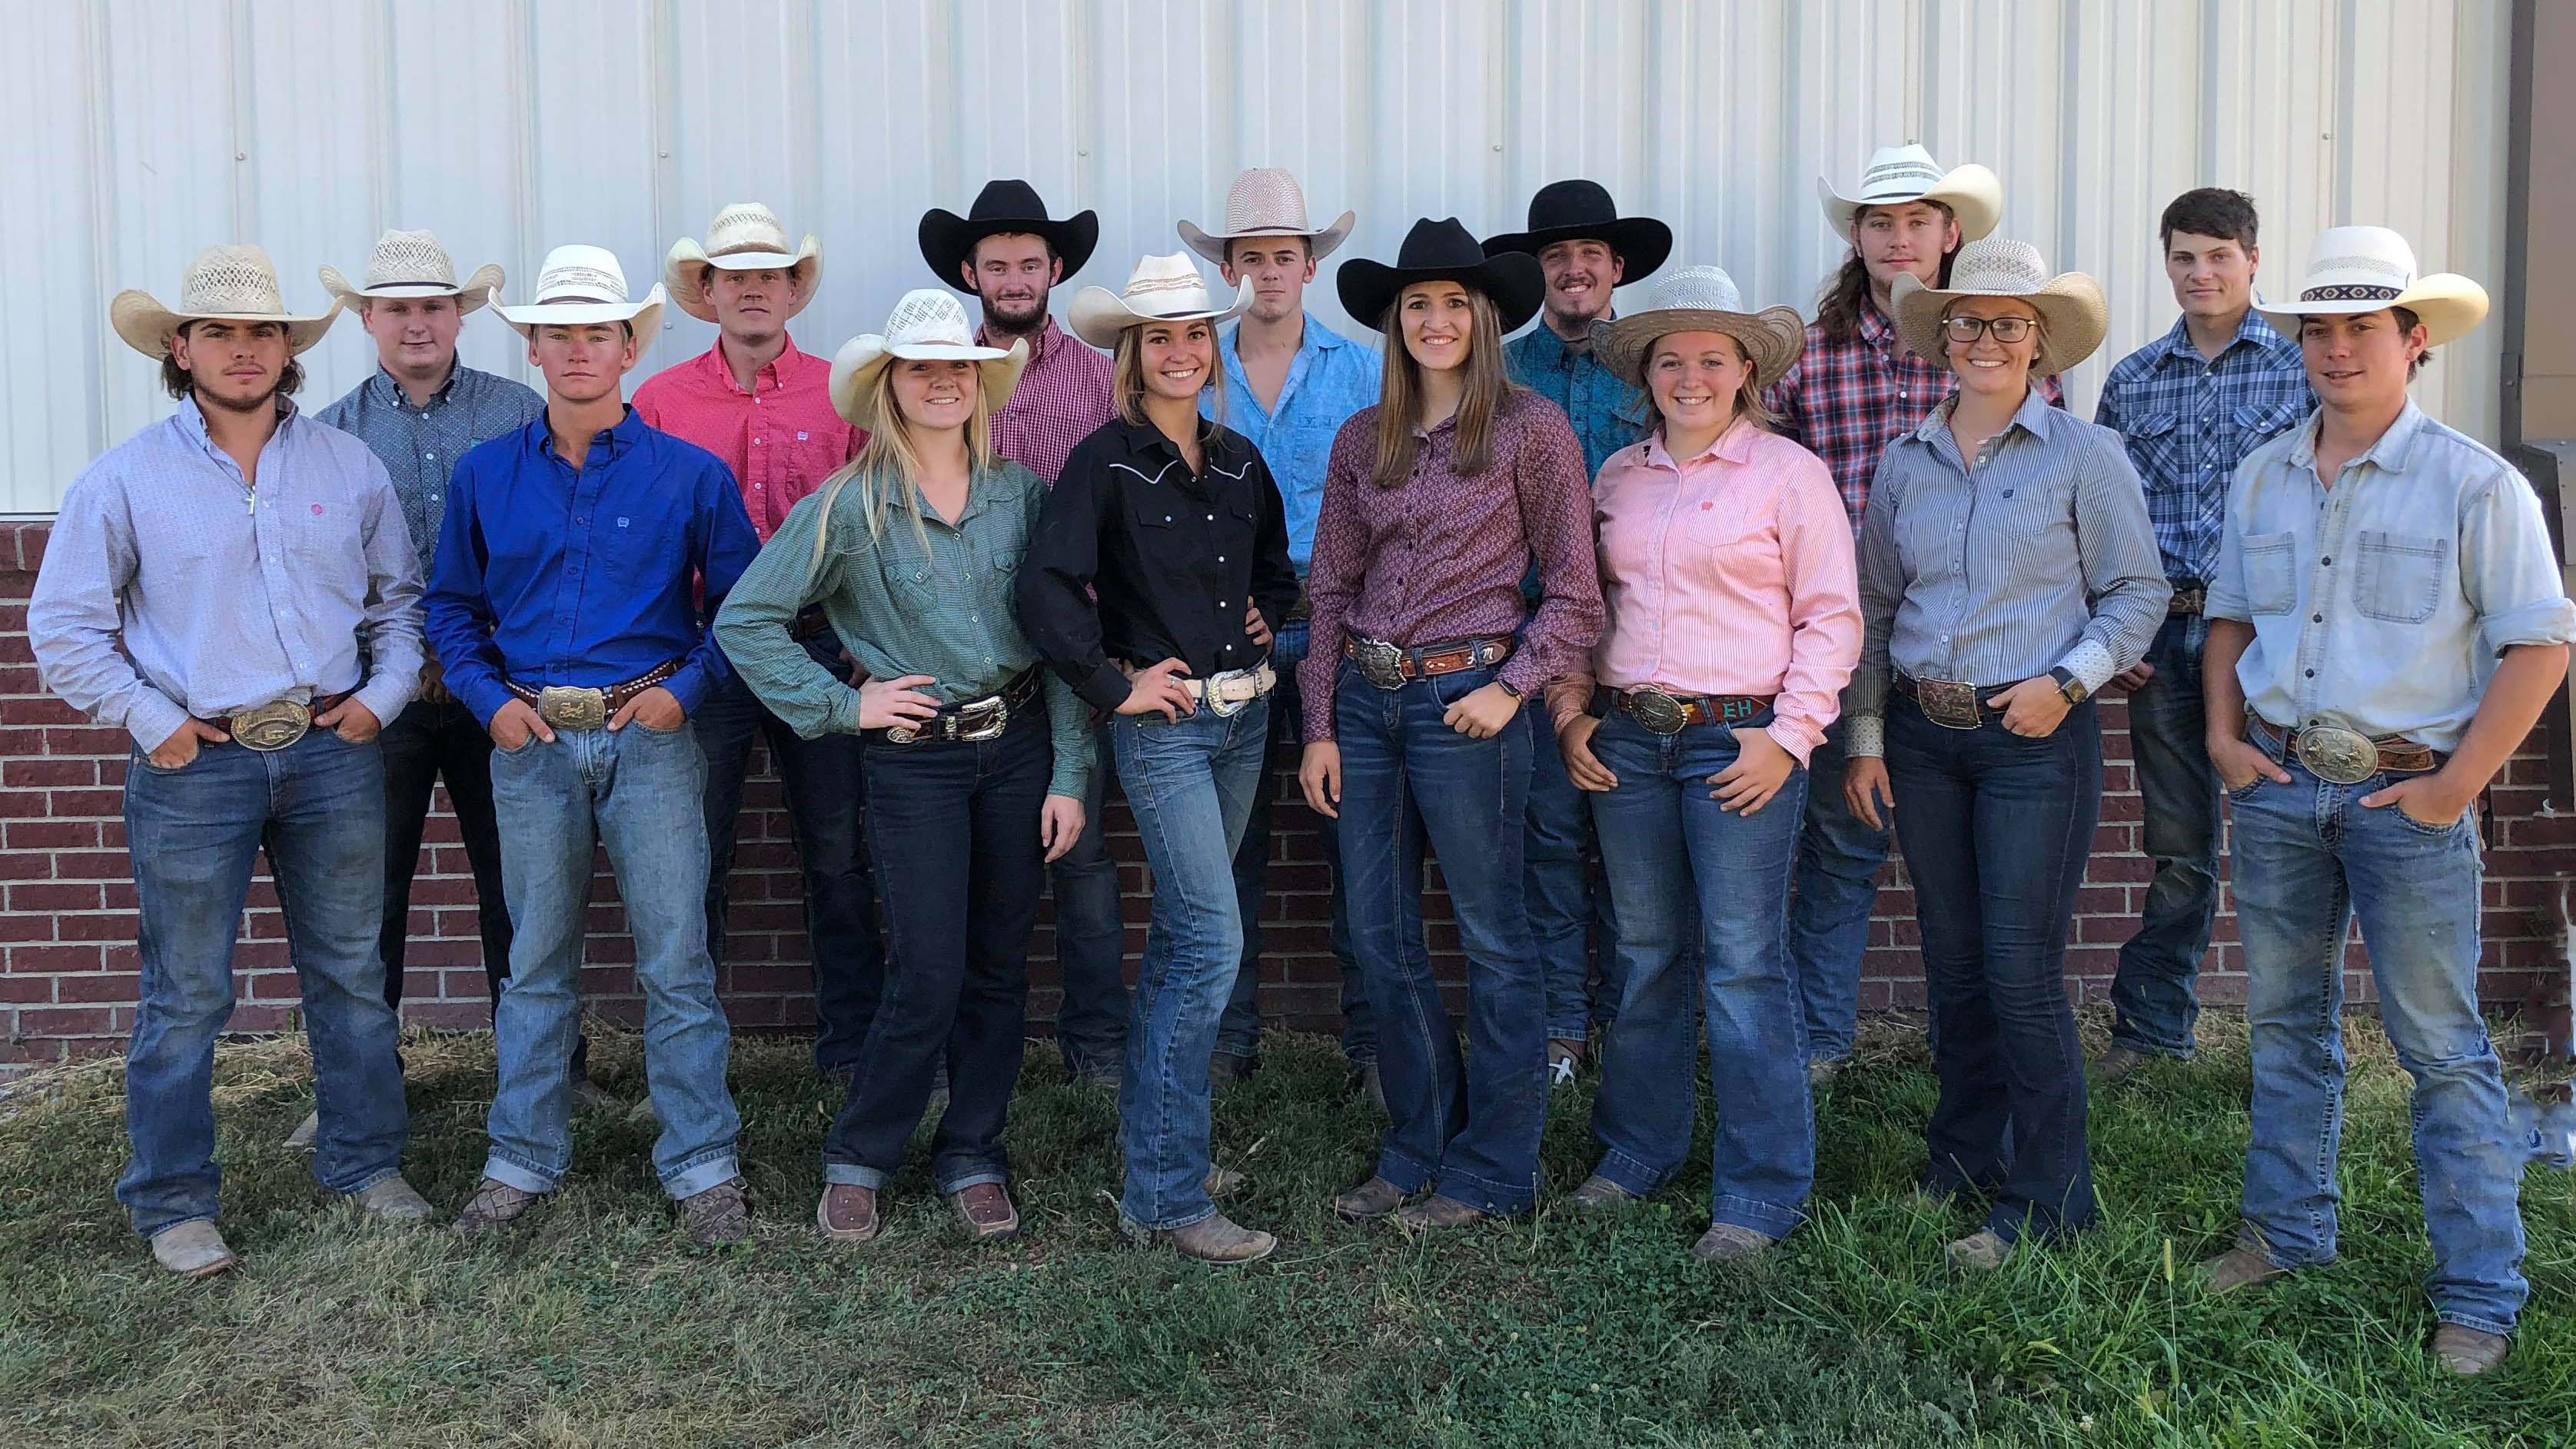 Aggie Rodeo Team ended its fall season in September yet the students meet for rodeo seminar twice weekly to hone their skills. Competition resumes next spring. (Emma Bassler / NCTA Rodeo)